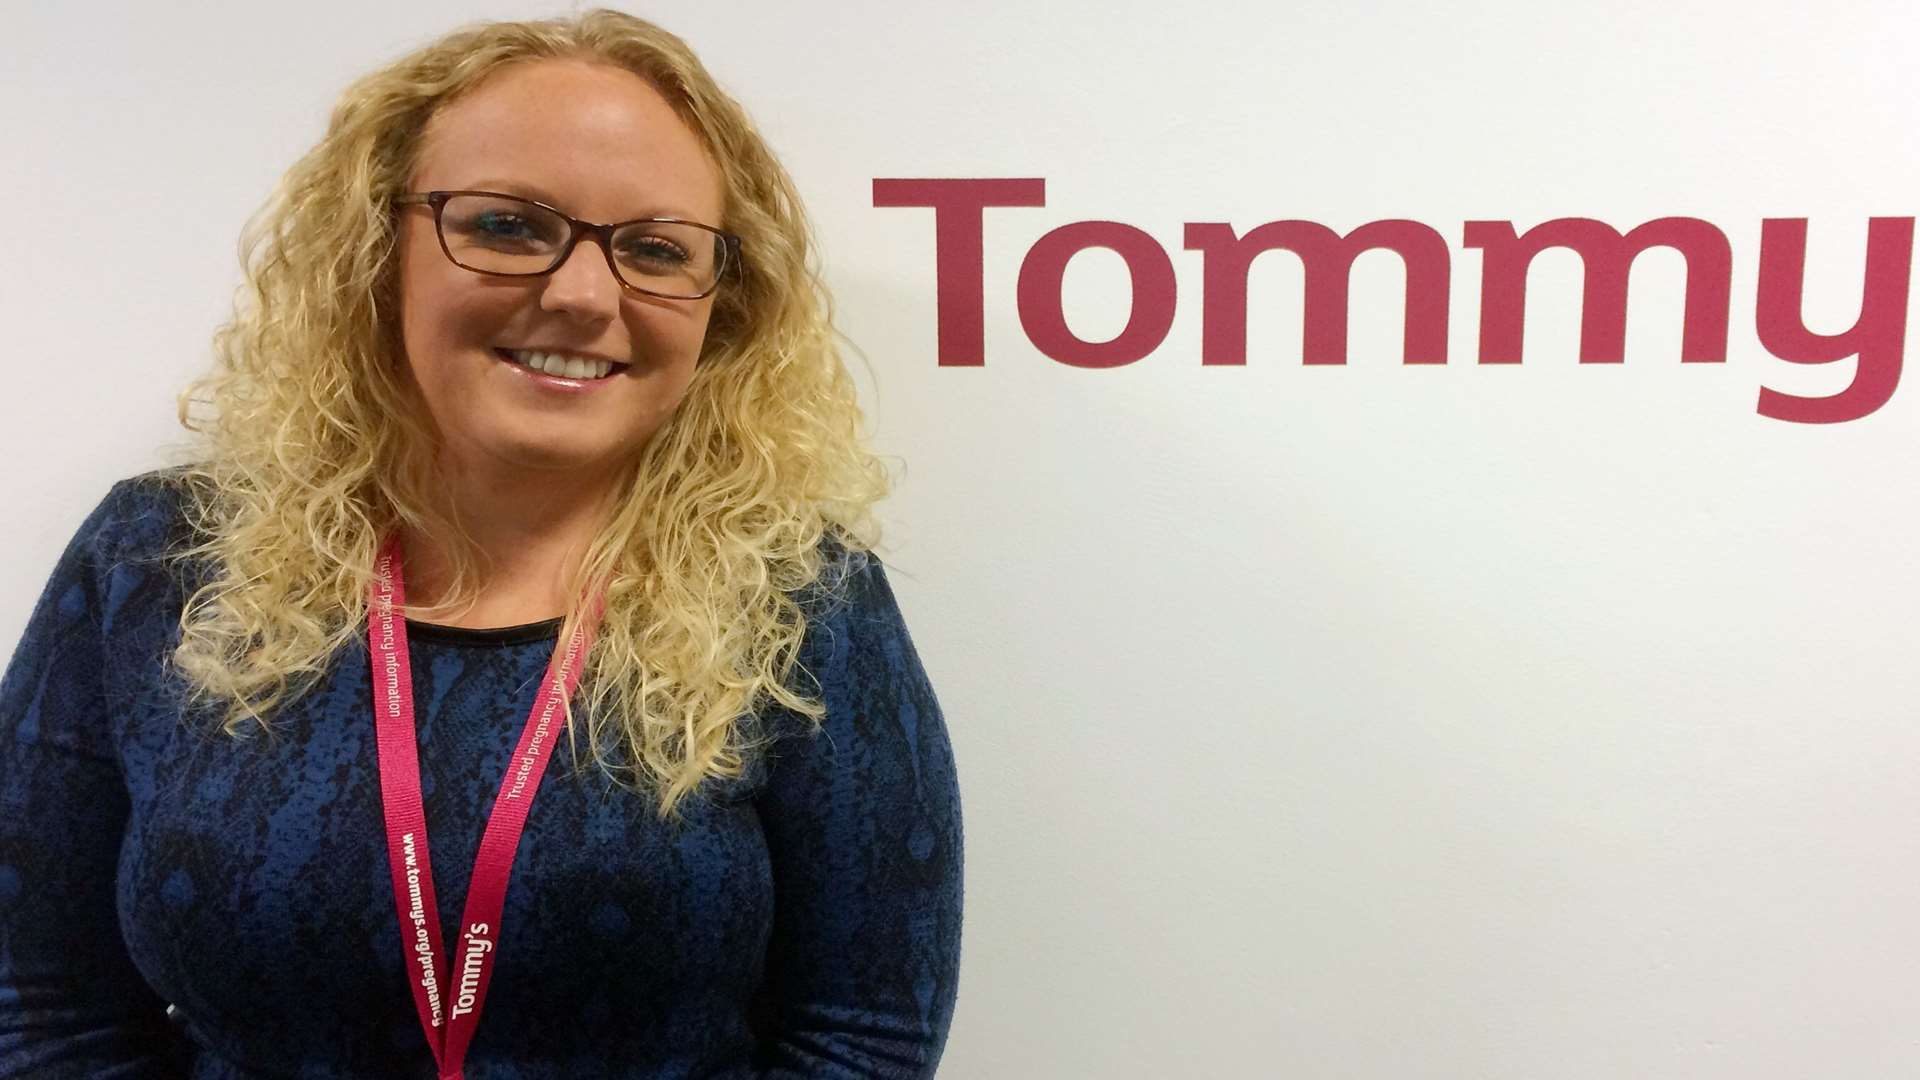 Sophie King, a midwife at Tommy's, the charity funding medical research to save babies lives